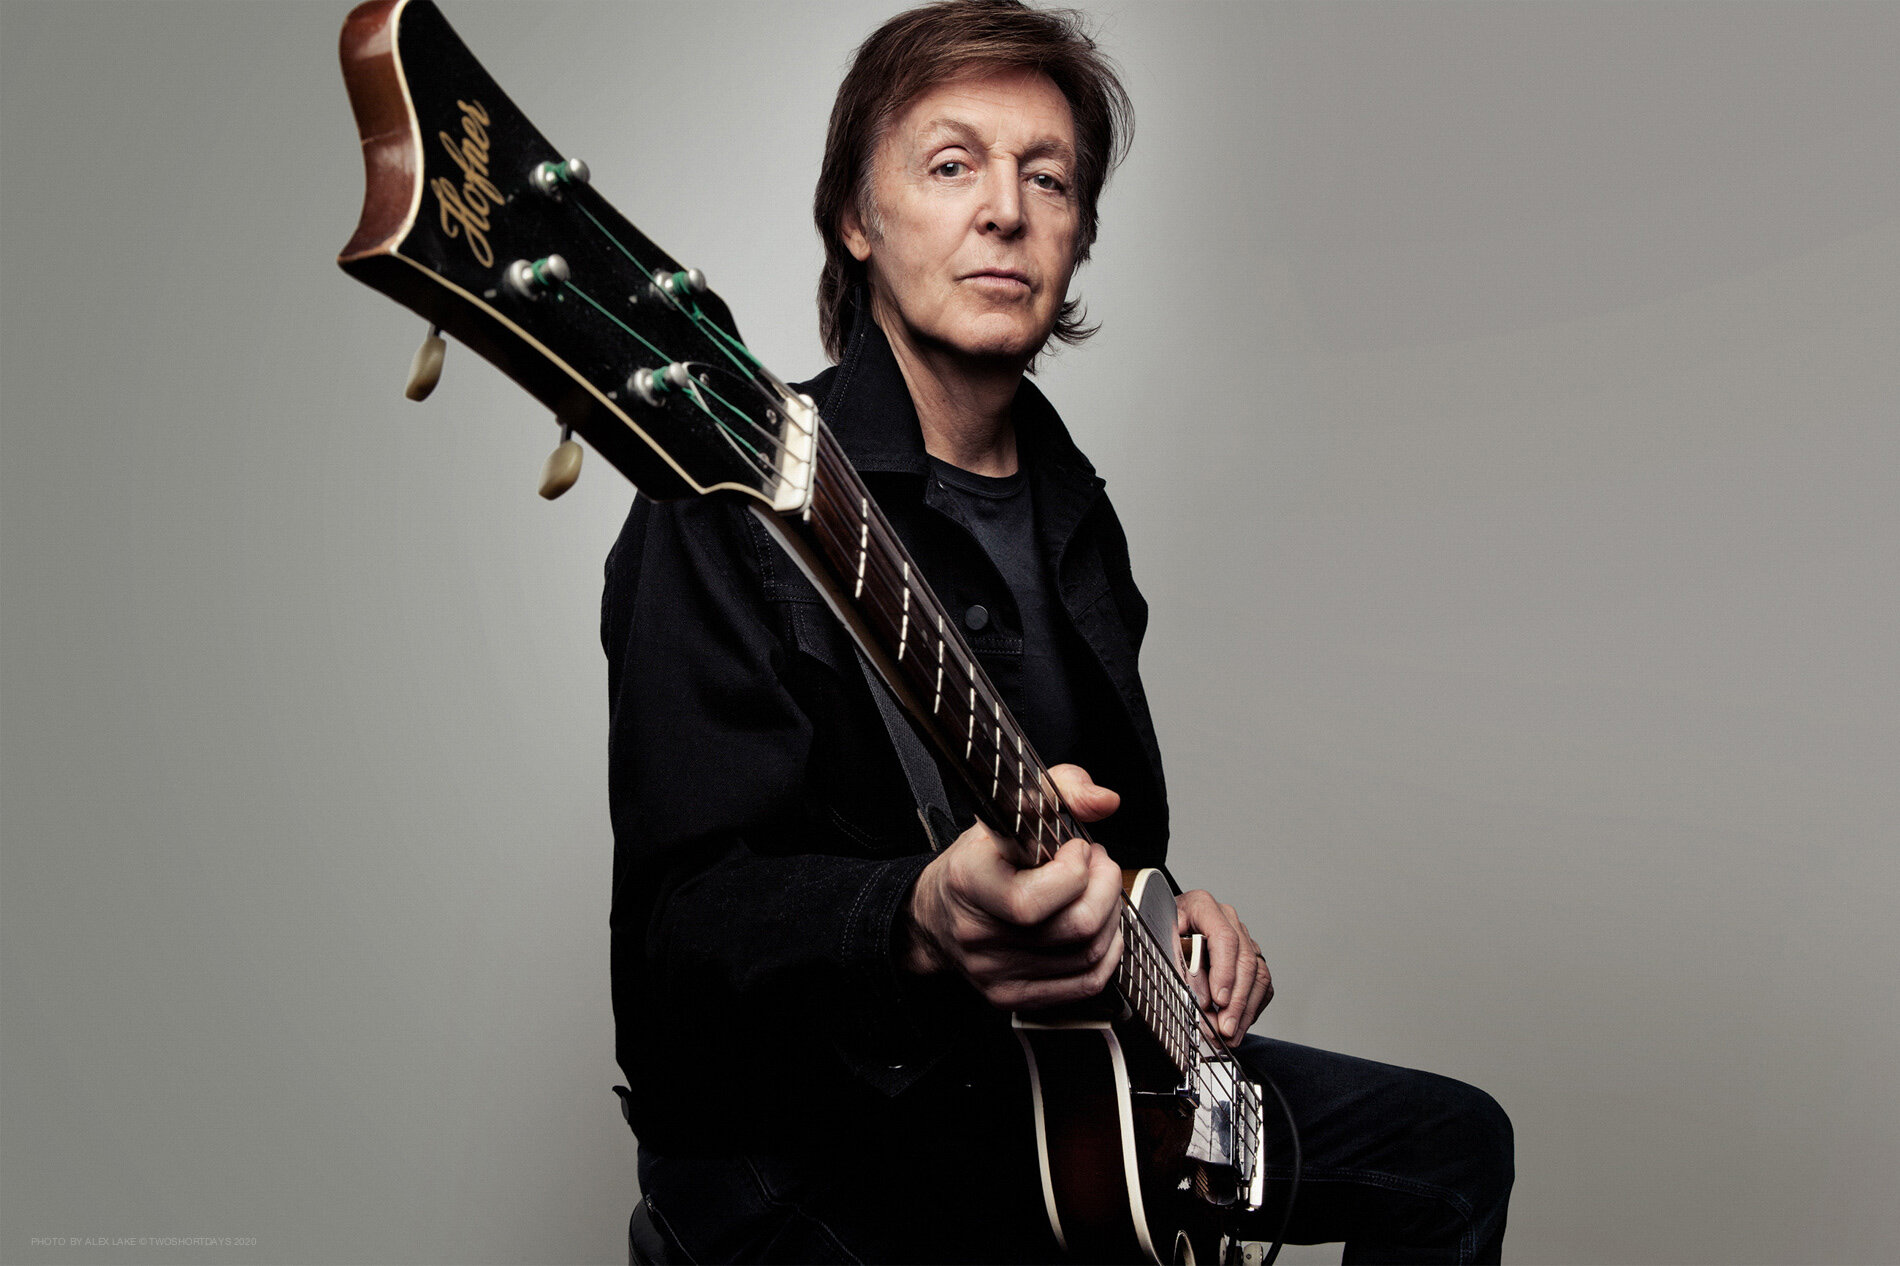 paul_maccartney_photography_copyright_ALEX_LAKE_do_not_reproduce_without_permission_TWOSHORTDAYS.jpg